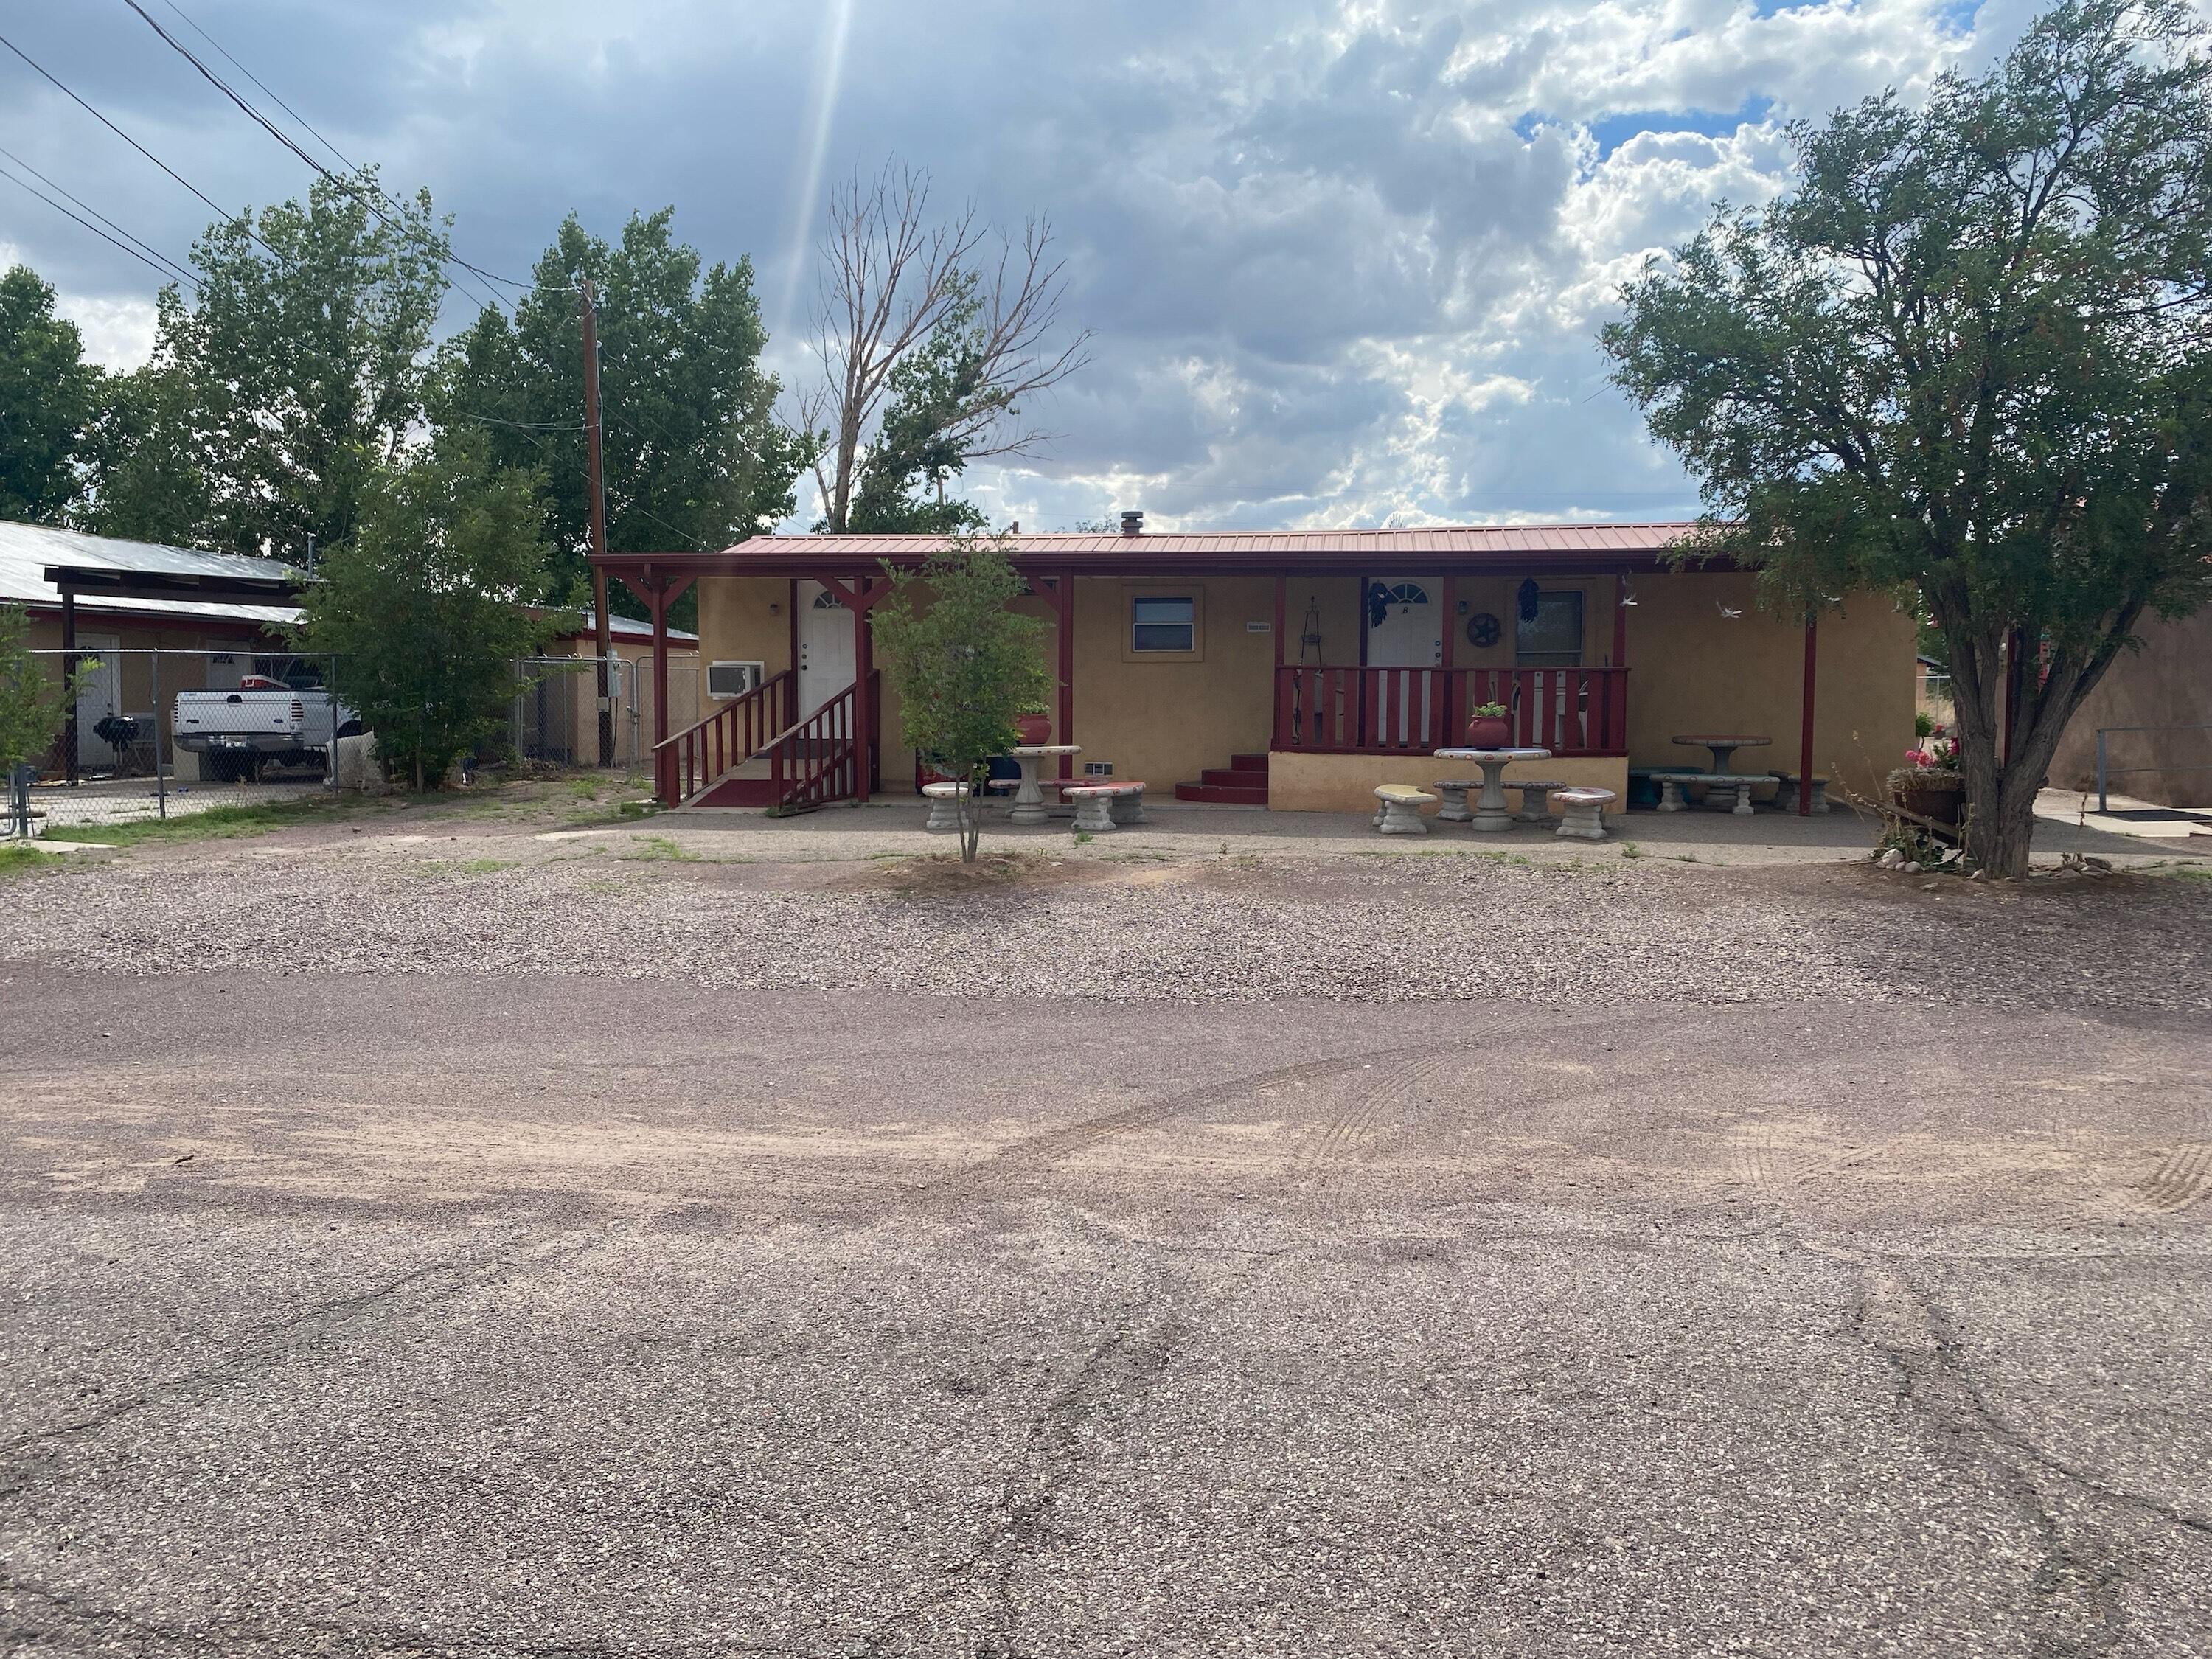 17 South Pino Street, San Antonio, New Mexico 87832, ,Commercial Sale,For Sale,17 South Pino Street,1020858